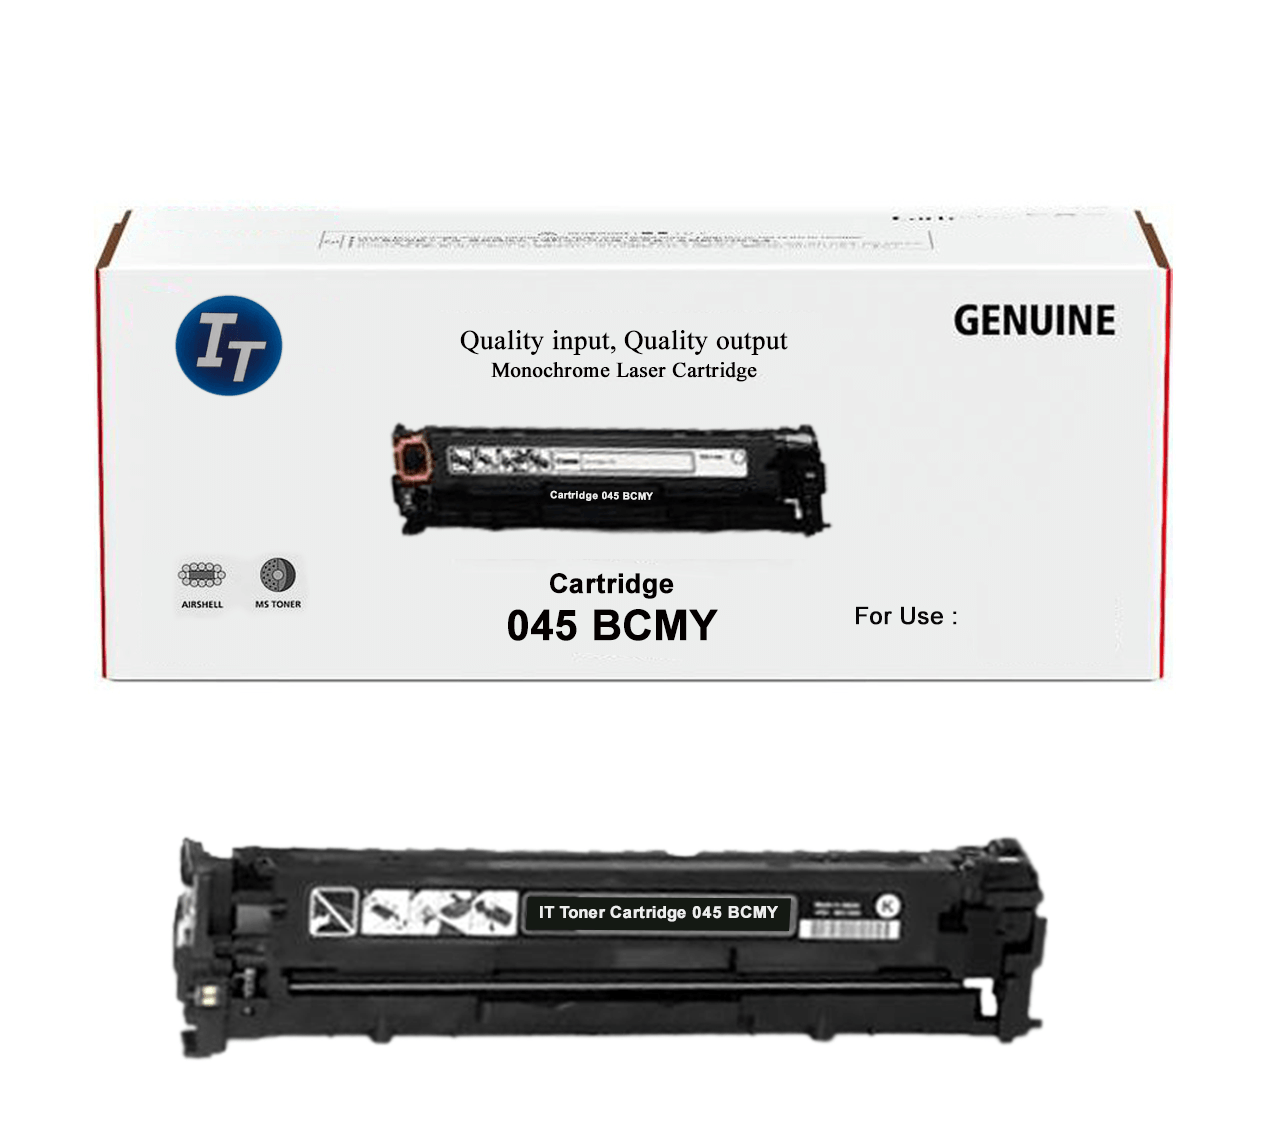 IT Toner Cartridge Canon 045 BCMY (7).png